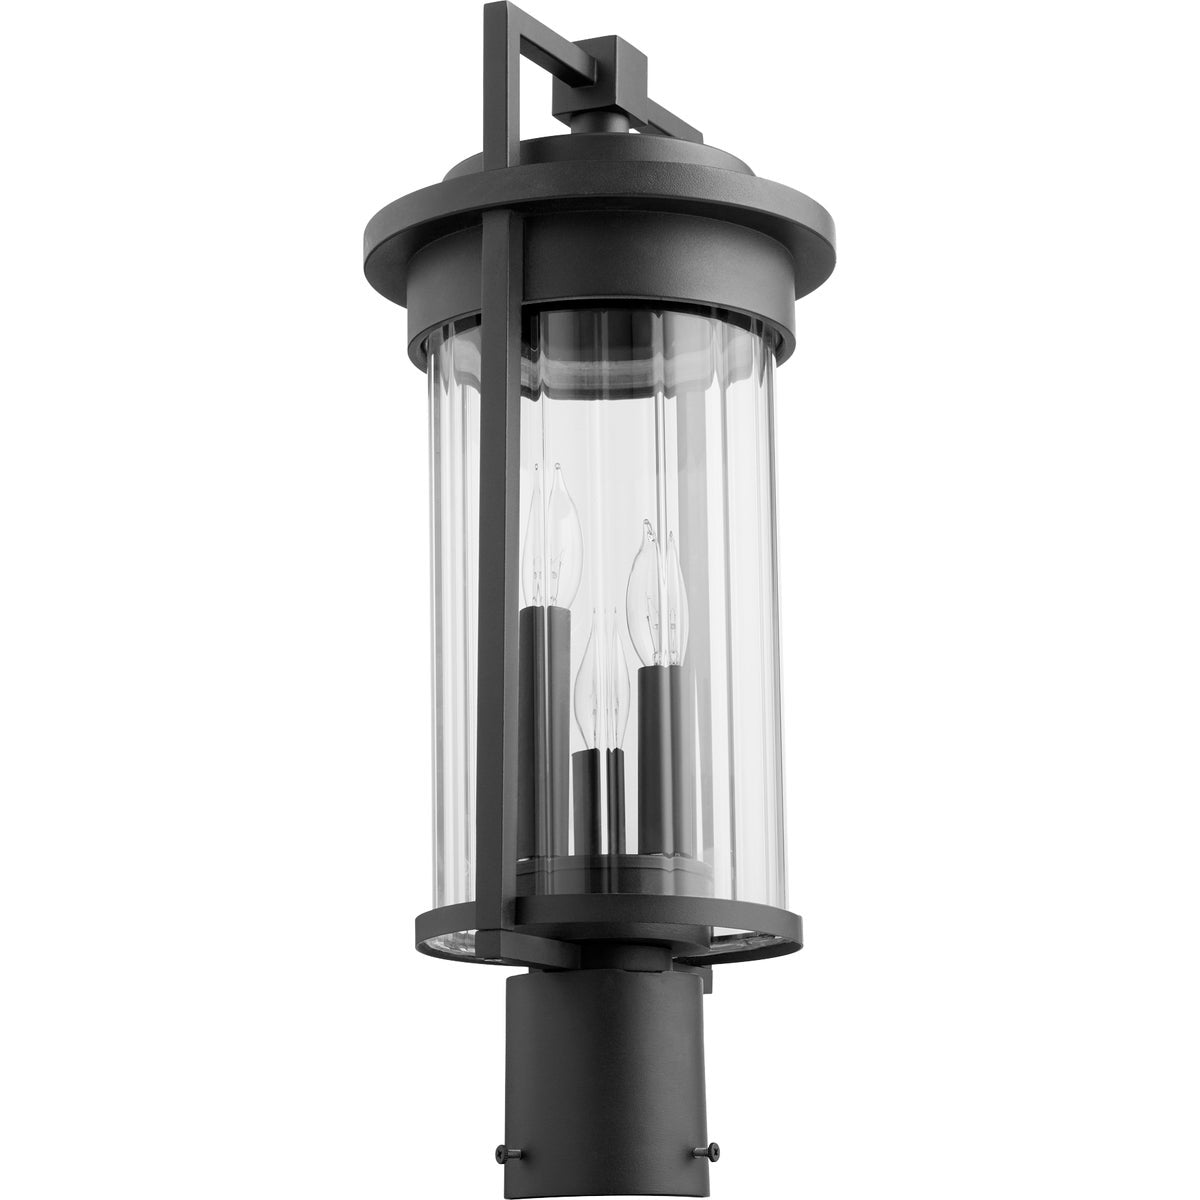 Contemporary Outdoor Post Light with clear glass shade, metal construction, and clean lines. Wet location rated. 40W, 120V, 3 bulbs (not included). 8.5"W x 19.5"H. UL Listed. 2-year warranty.